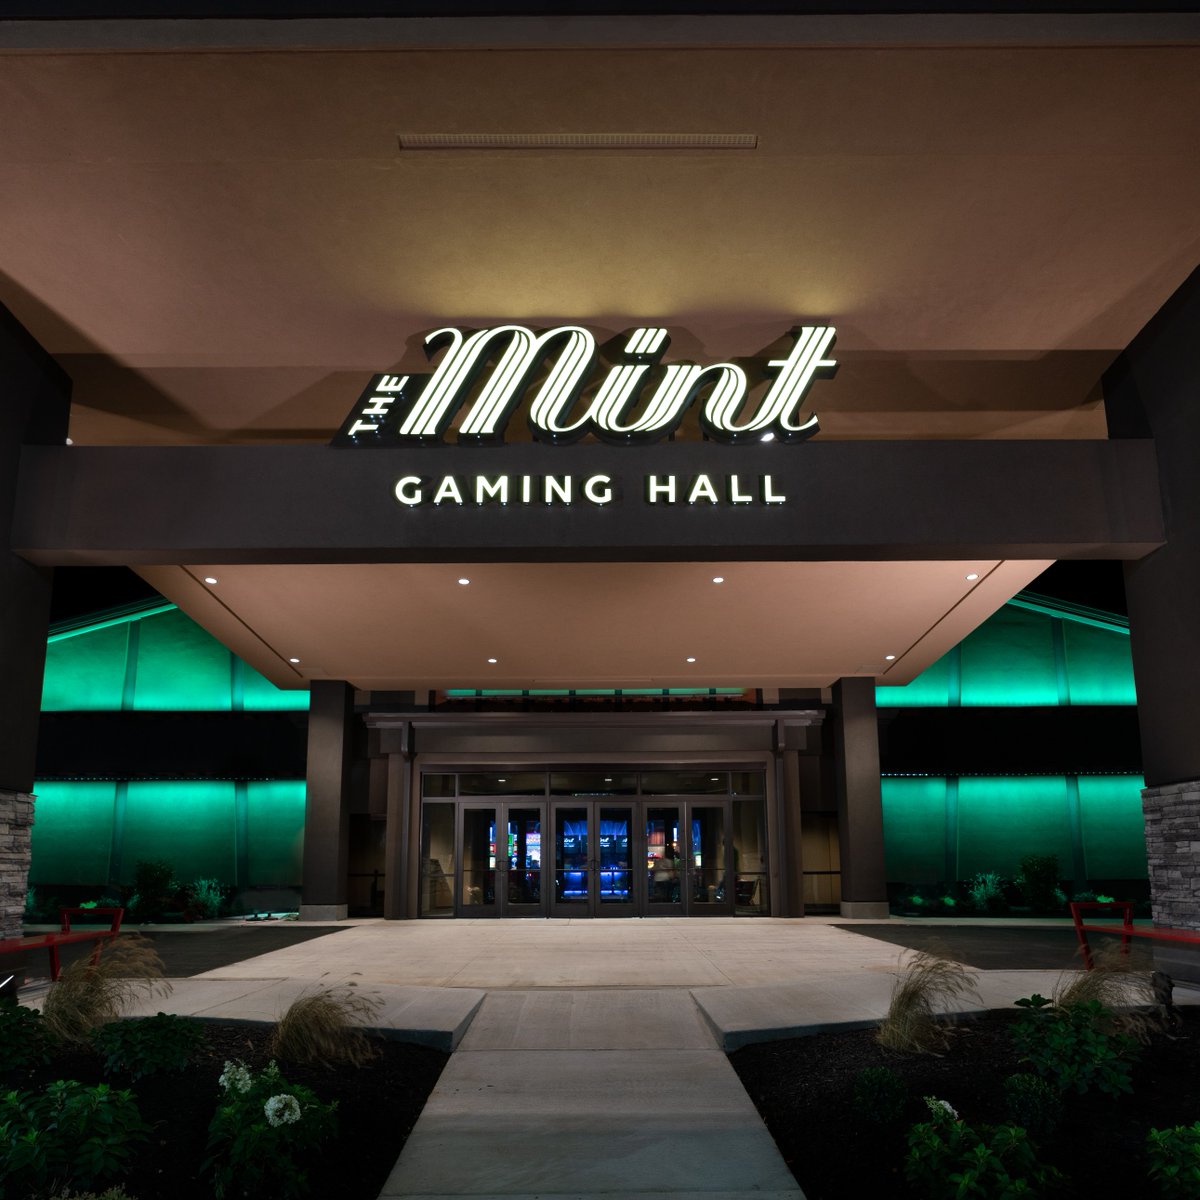 Feeling lucky? Stop by The Mint and play to win your own pot of gold! 💰 ☘️ #themint #kentuckygaming #kentuckylife